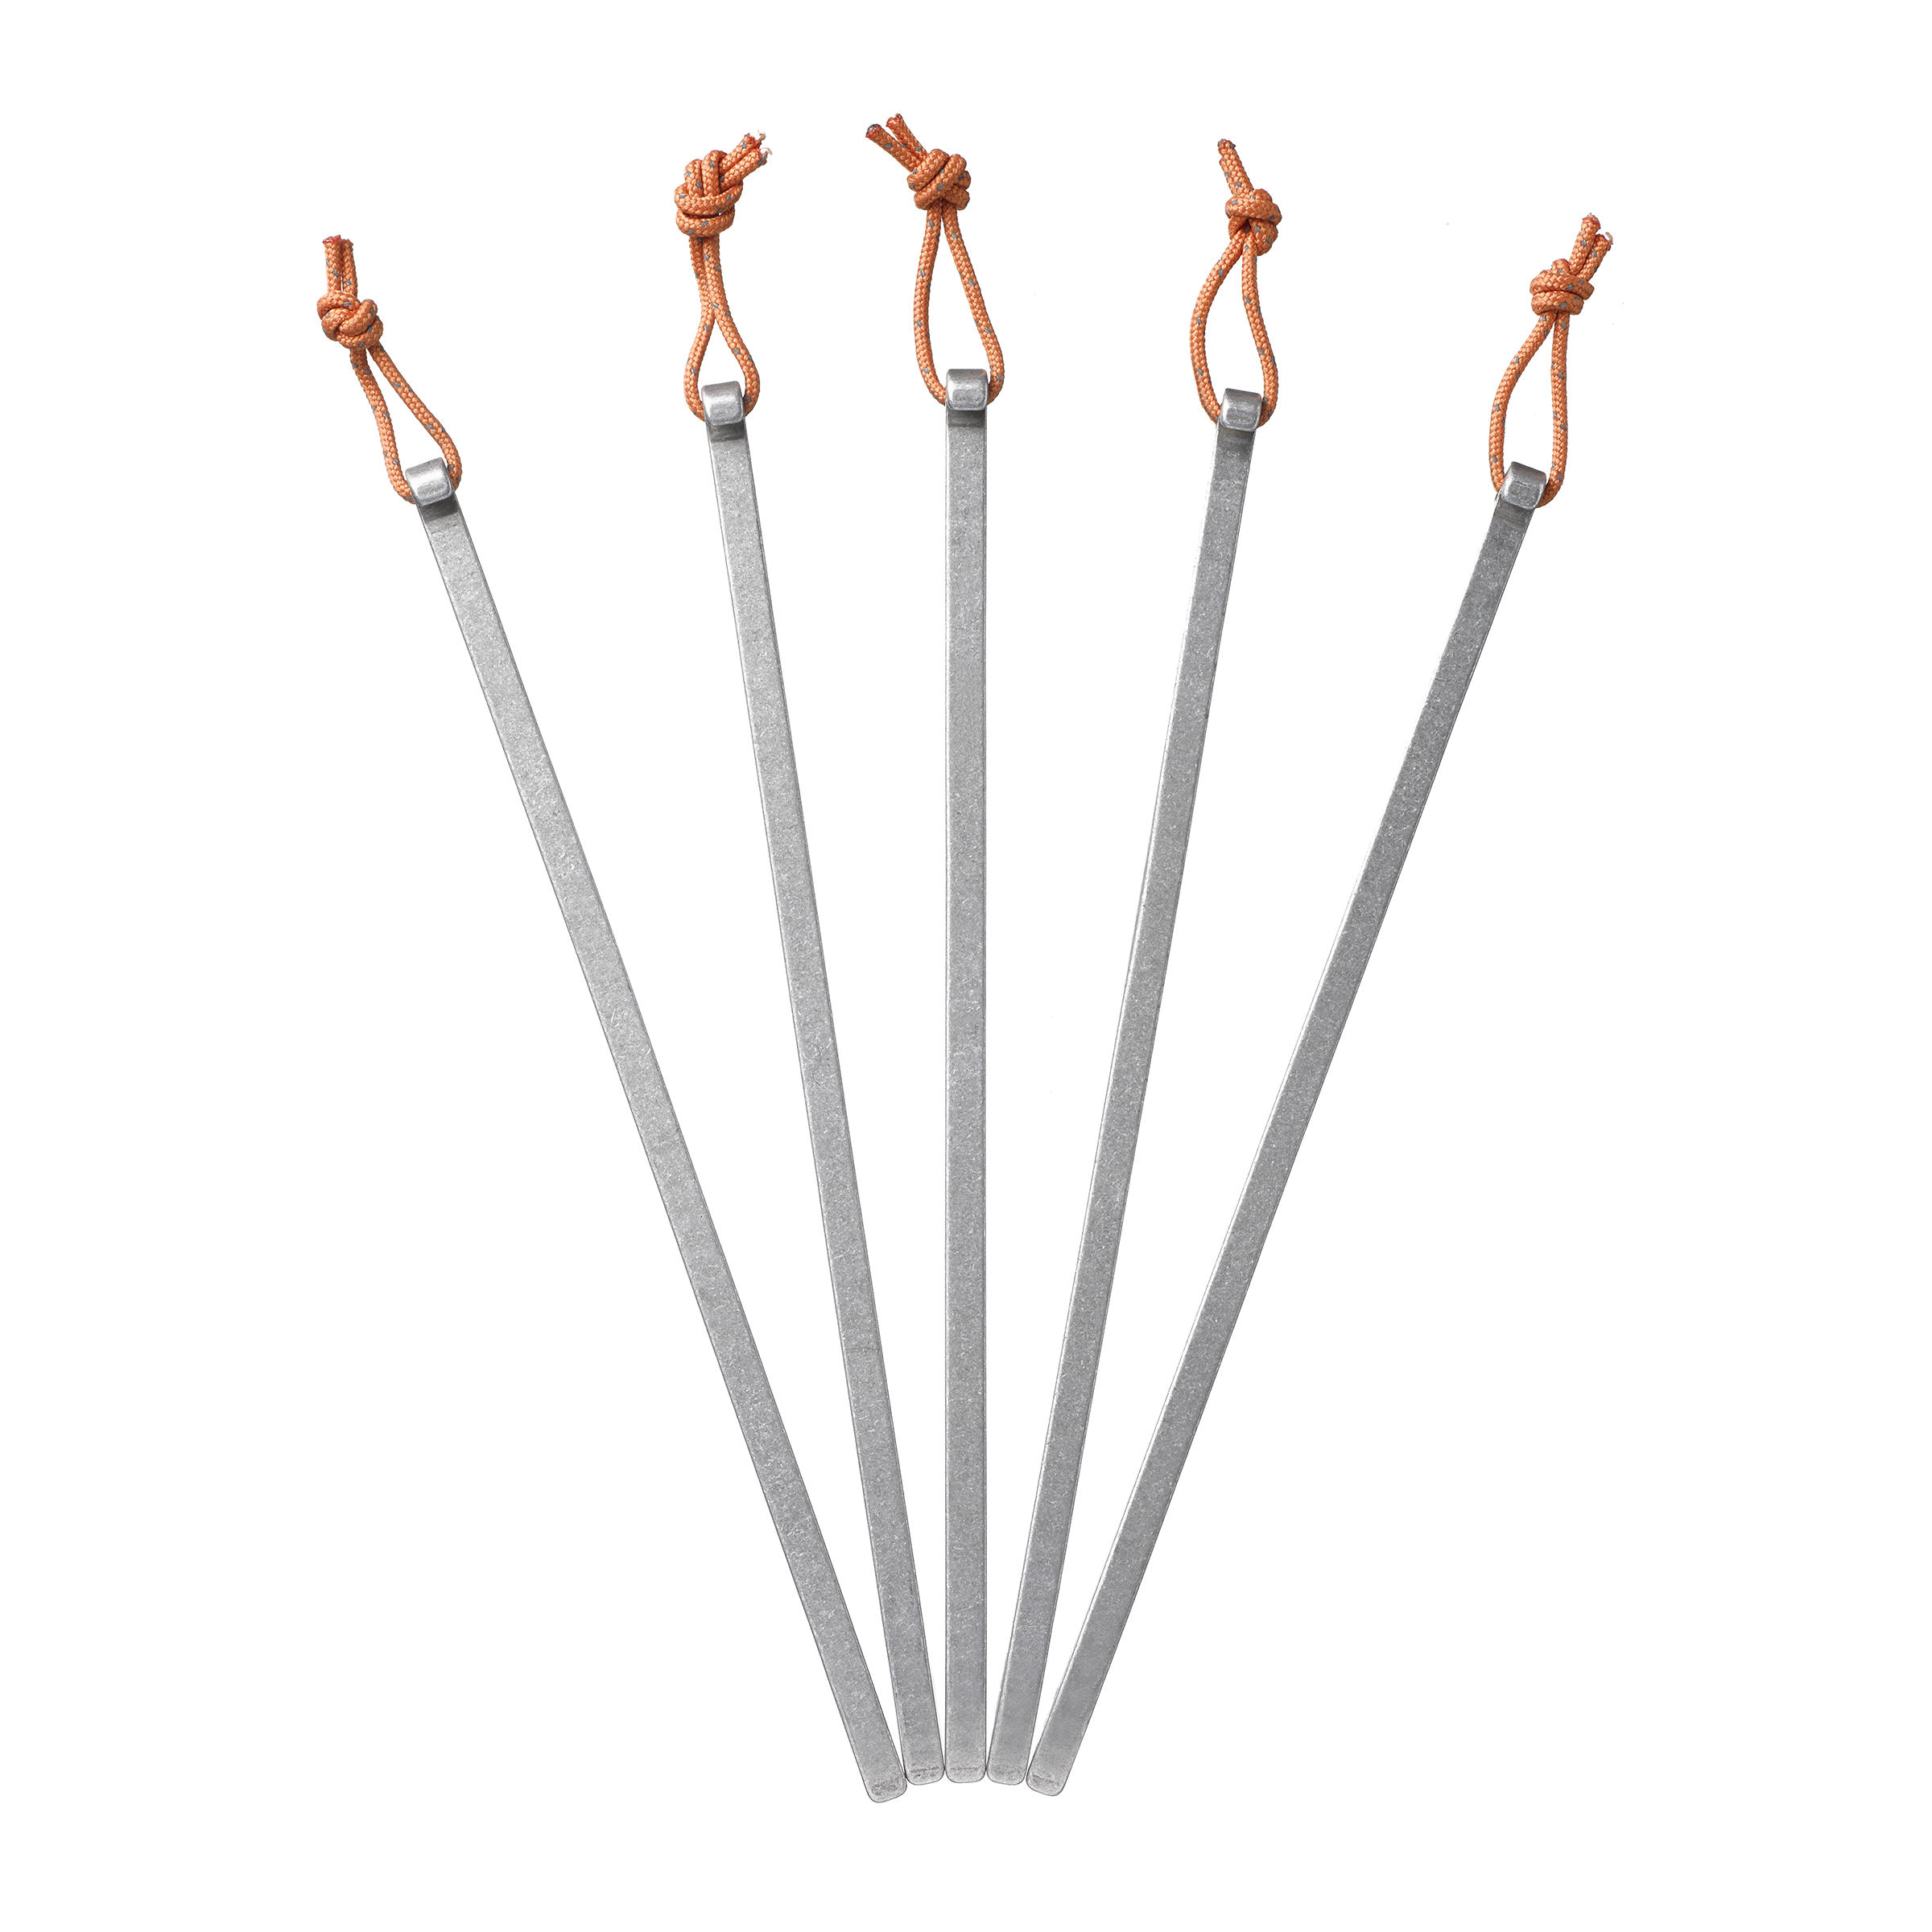 MT 900 Camping Ultralight Non-Anodized Tent Pegs x5 - Forclaz